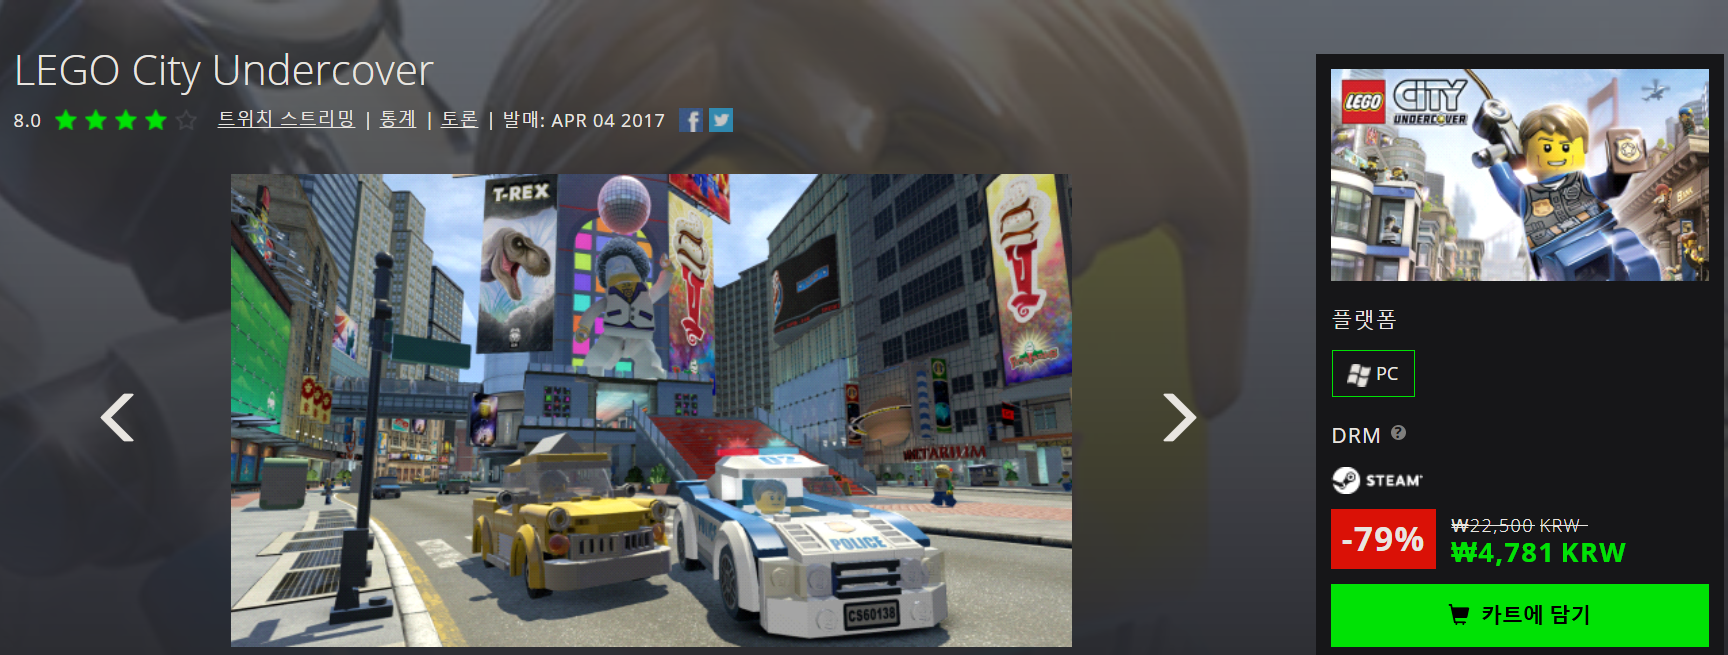 Screenshot_2019-11-16 LEGO City Undercover - PC PC Game key.png